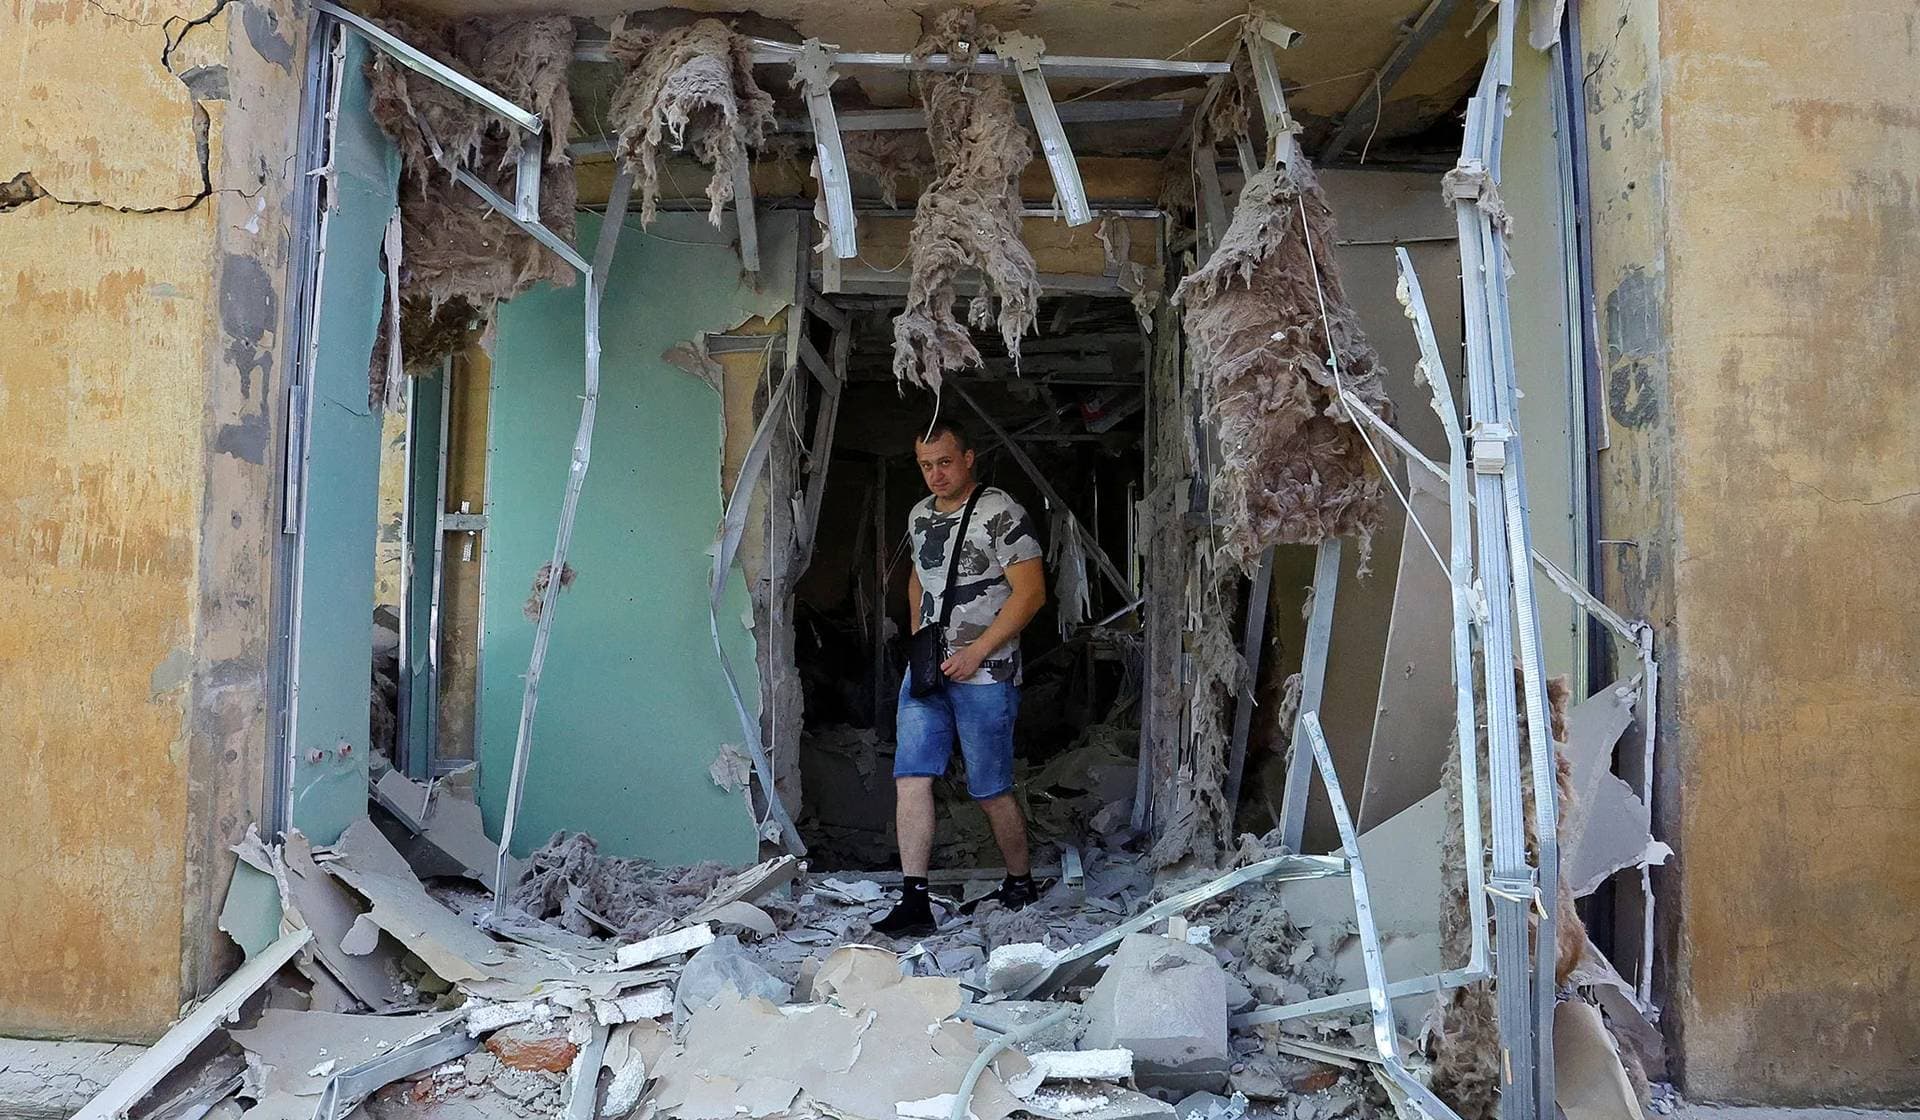 A local resident walks through his neighbors' apartment damaged by recent shelling in Donetsk